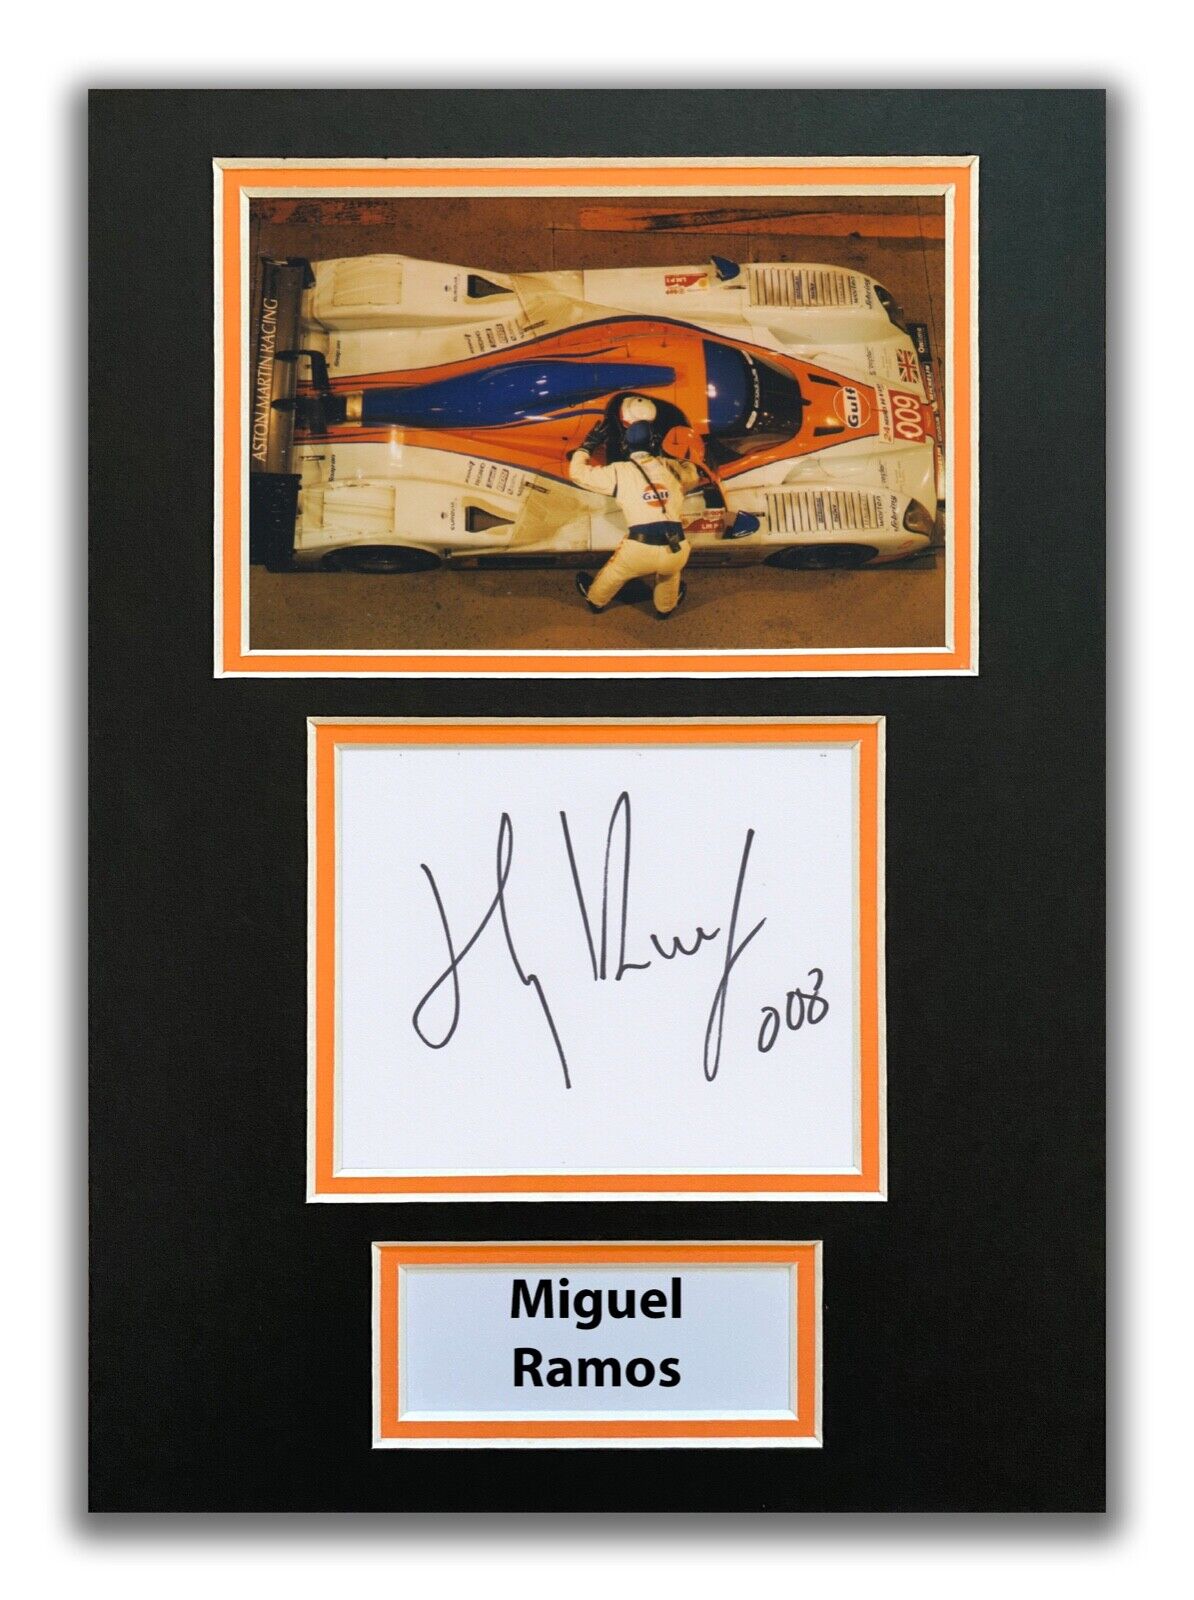 MIGUEL RAMOS HAND SIGNED A4 MOUNTED Photo Poster painting DISPLAY - ASTON MARTIN - LE MANS 1.